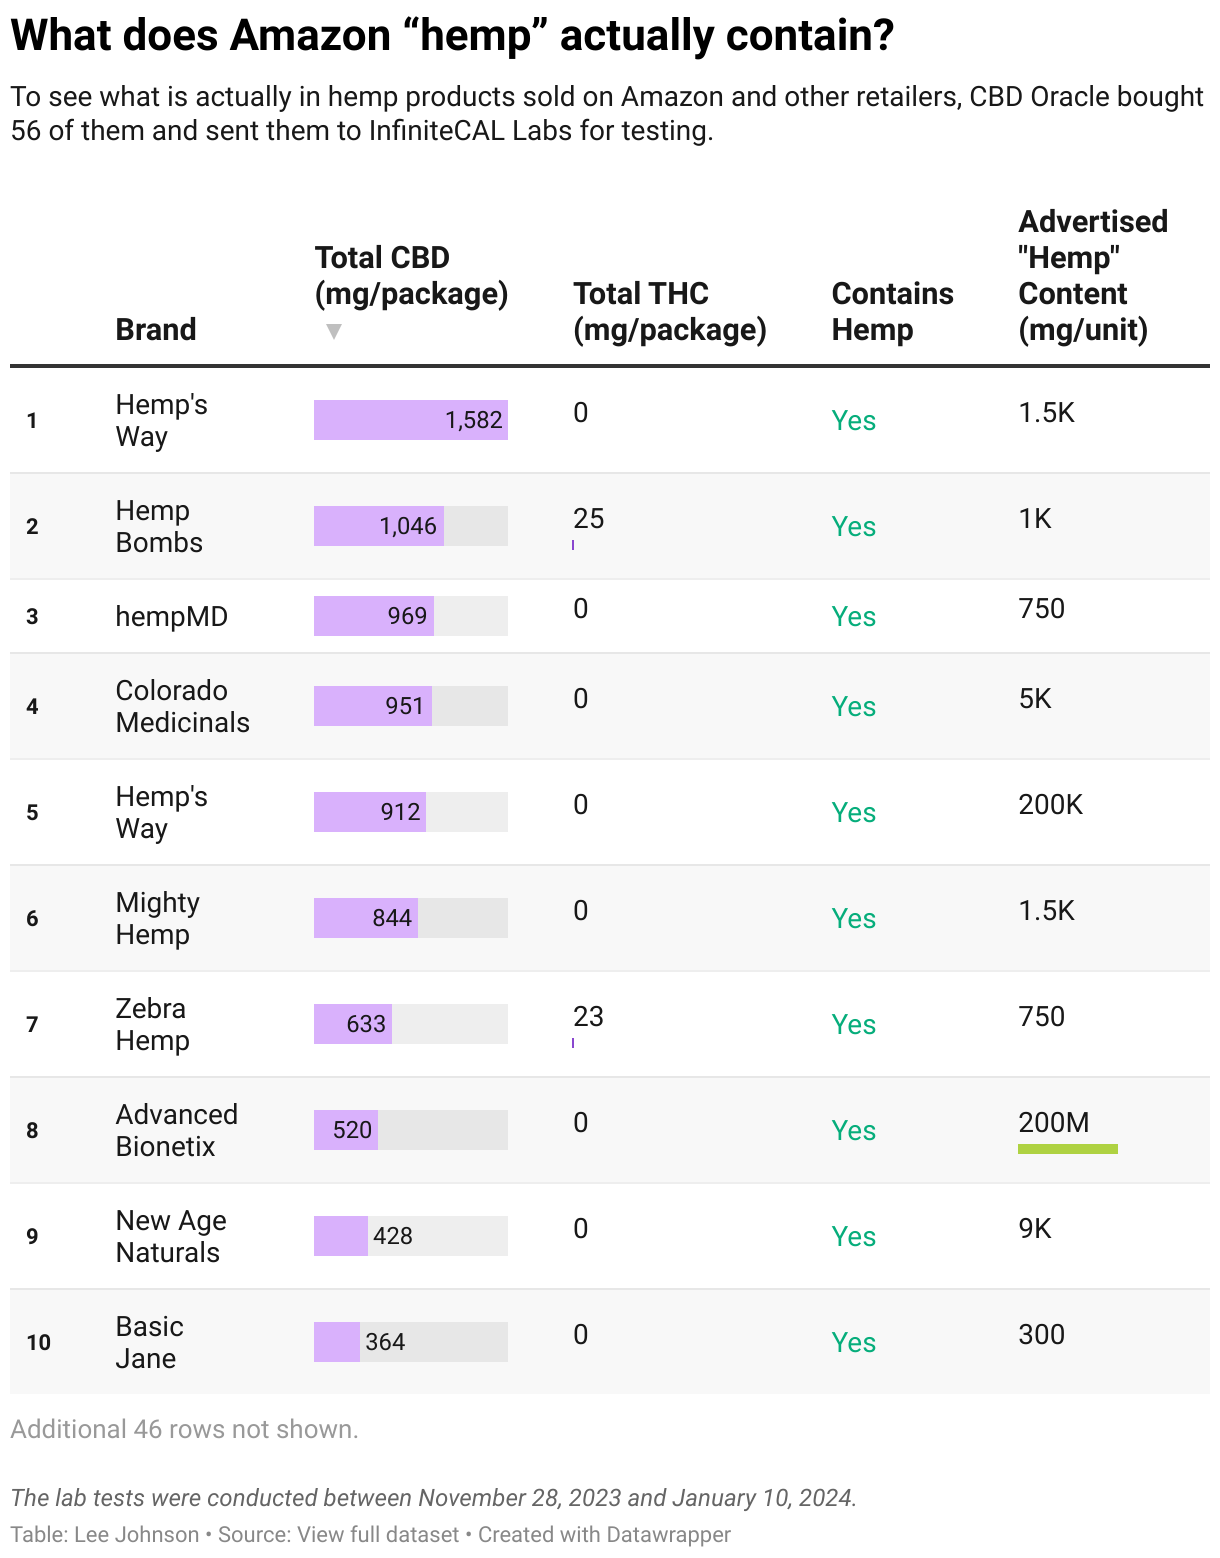 This table displays lab test results for hemp products that are sold on Amazon. The data largely shows that a third of products contain CBD and some contain THC.